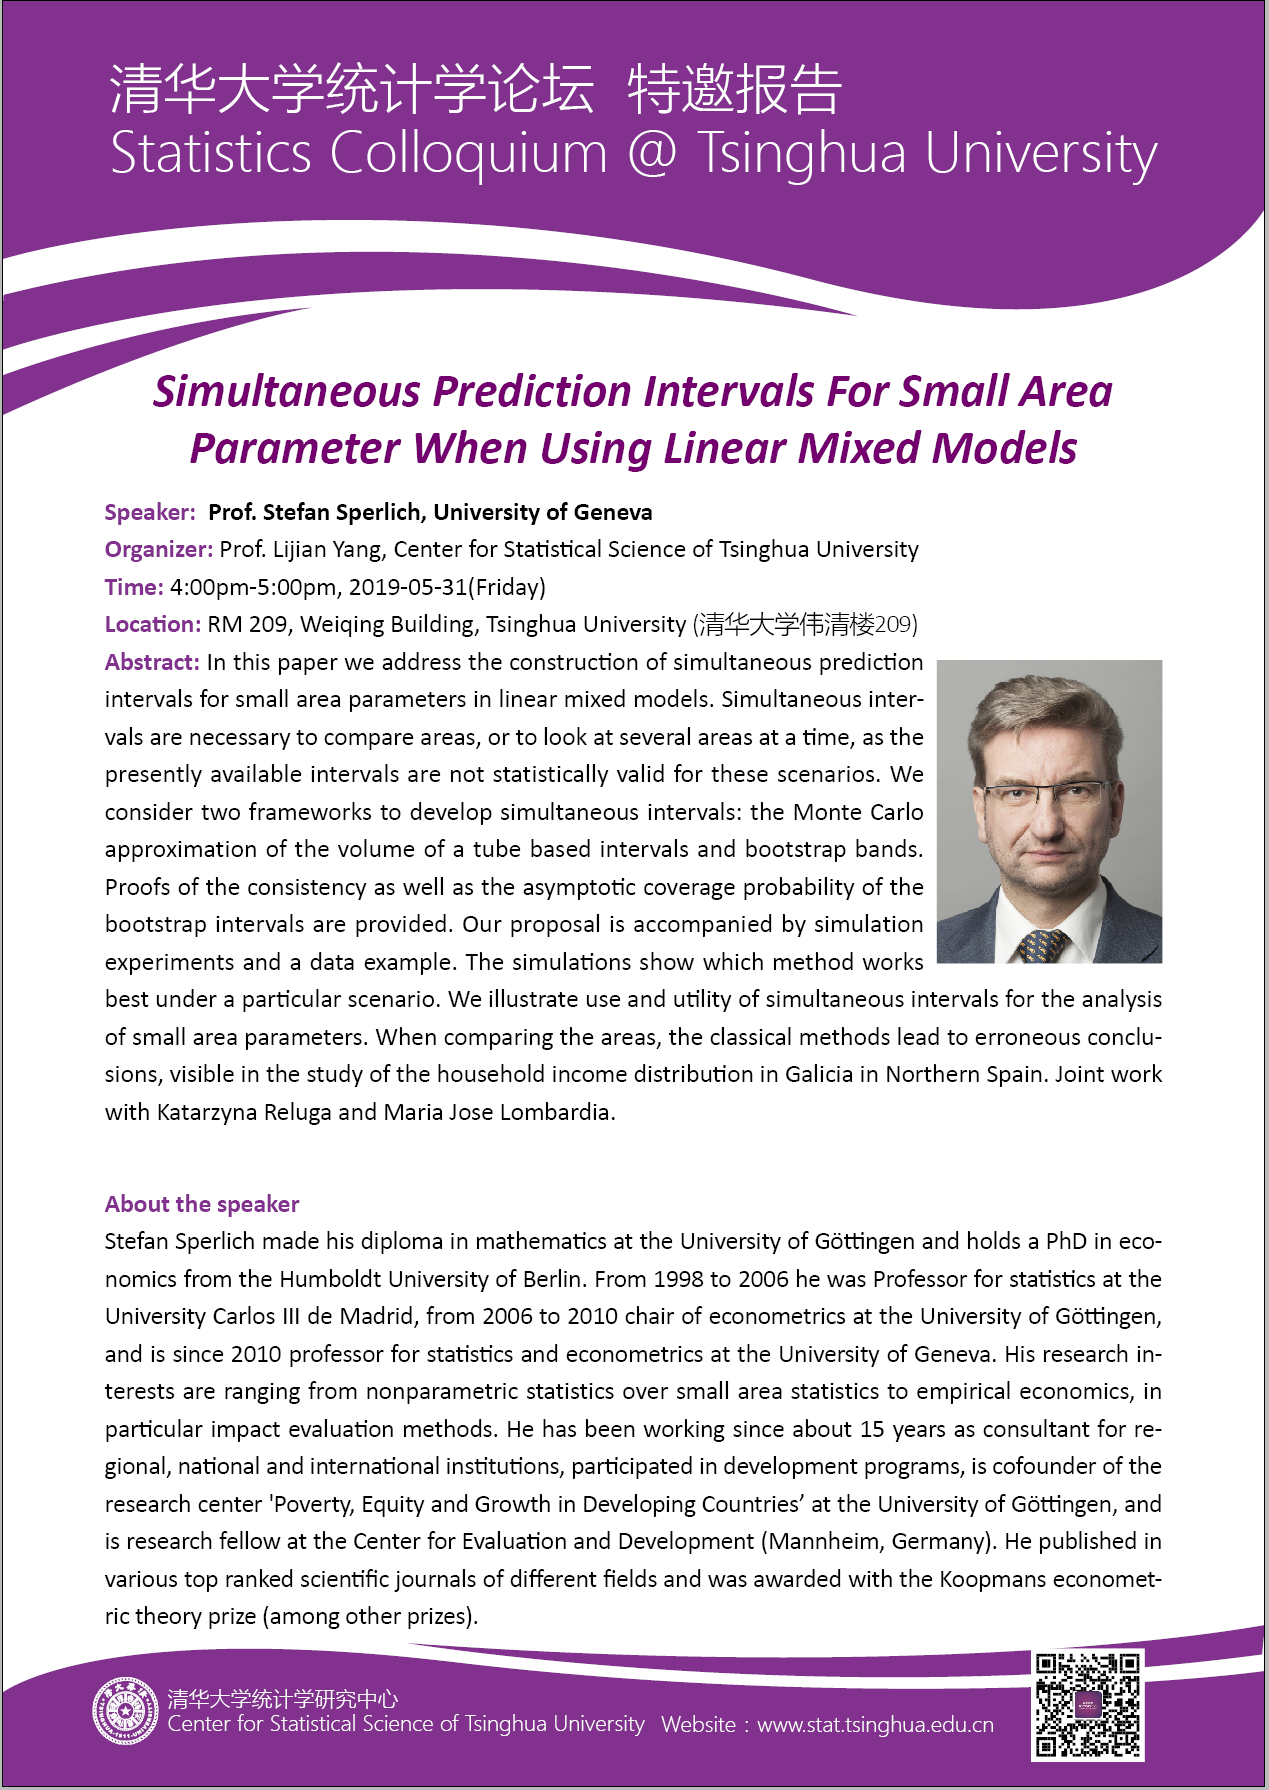 Simultaneous Prediction Intervals for Small Area Parameter When Using Linear Mixed Models